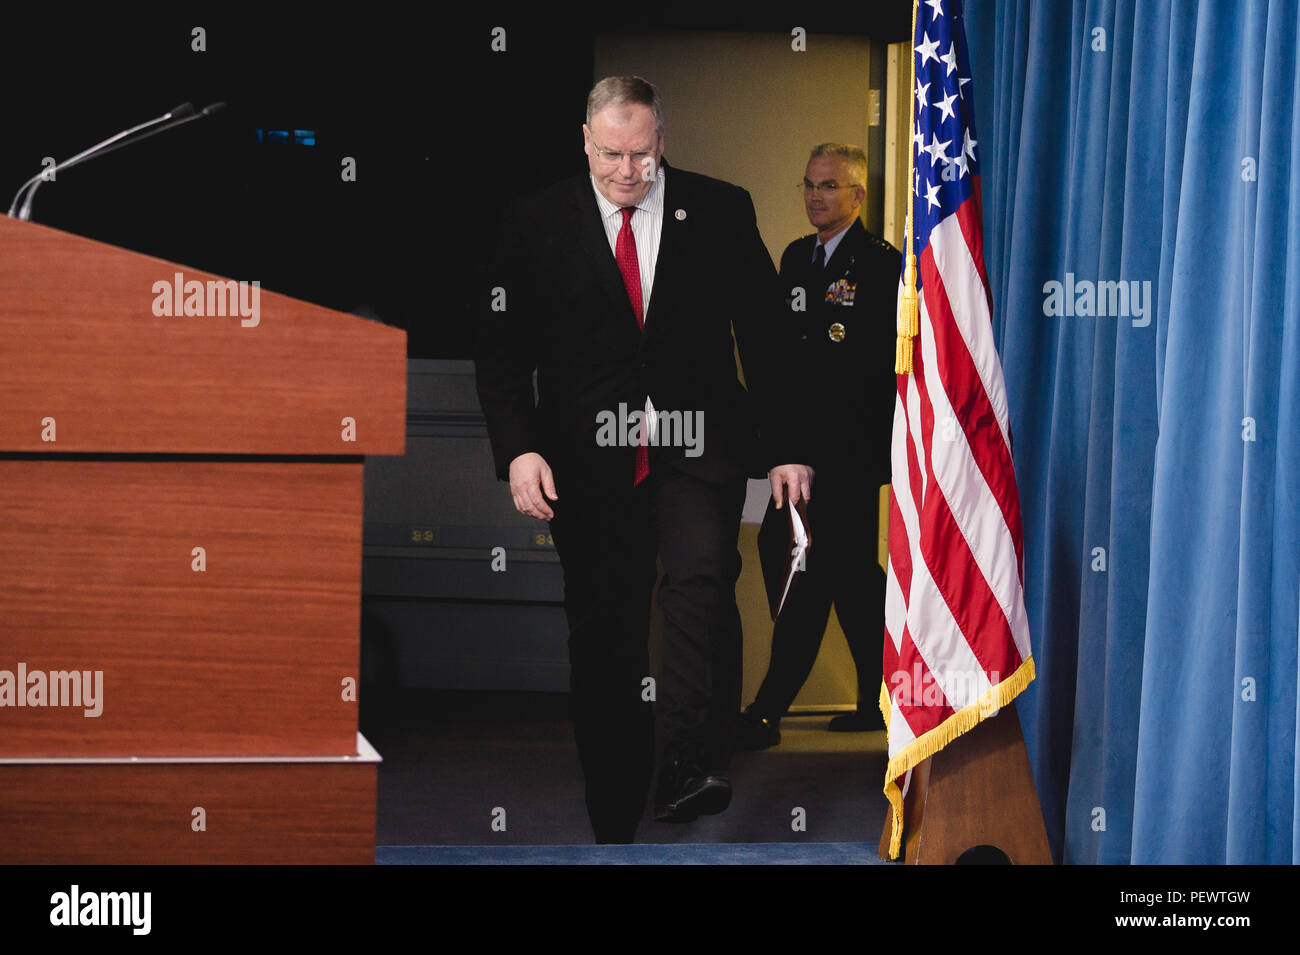 Deputy Secretary of Defense Bob Work and U.S. Air Force Gen. Paul J. Selva, vice chairman of the Joint Chiefs of Staff, enter the Pentagon Briefing Room for a briefing on the President's Fiscal Year 2017 Defense budget, Feb. 9, 2016. (DoD photo by Army Staff Sgt. Sean K. Harp) Stock Photo